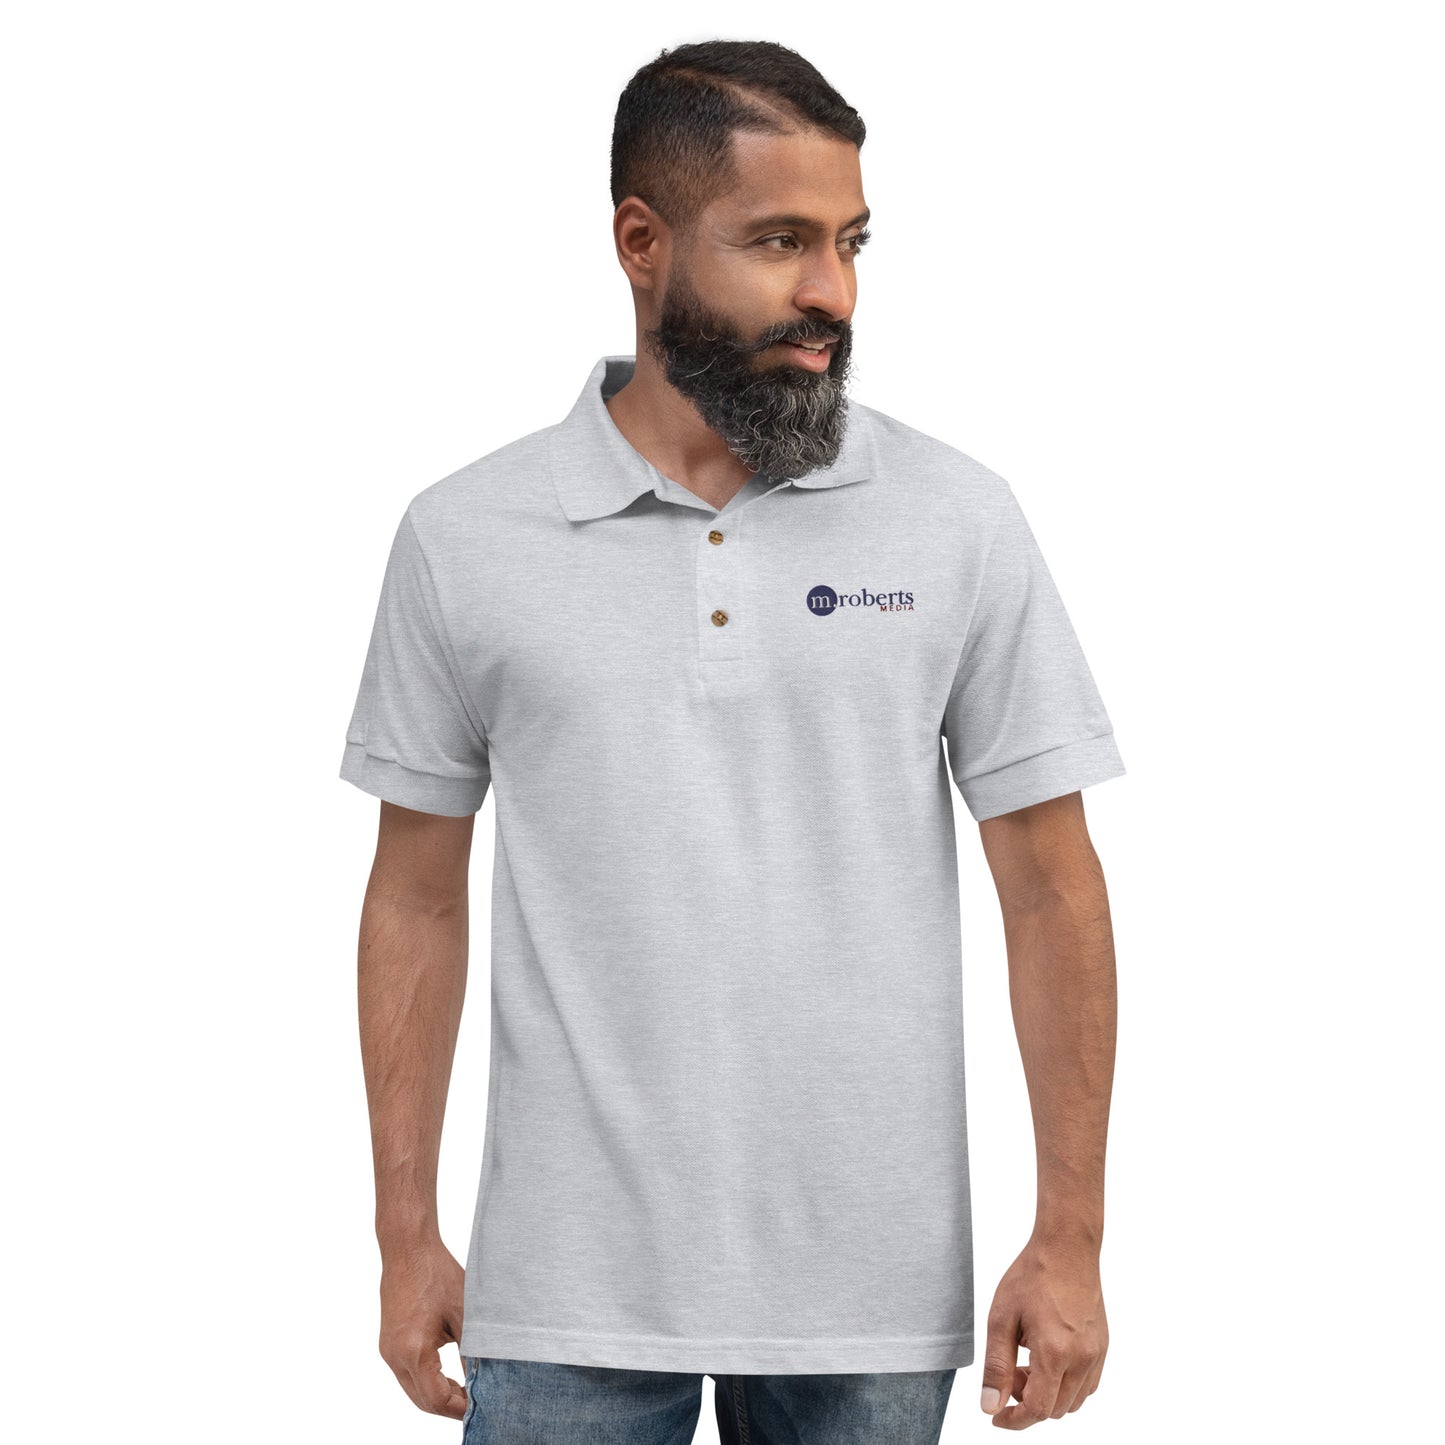 M. Roberts Media - Embroidered Polo Shirt